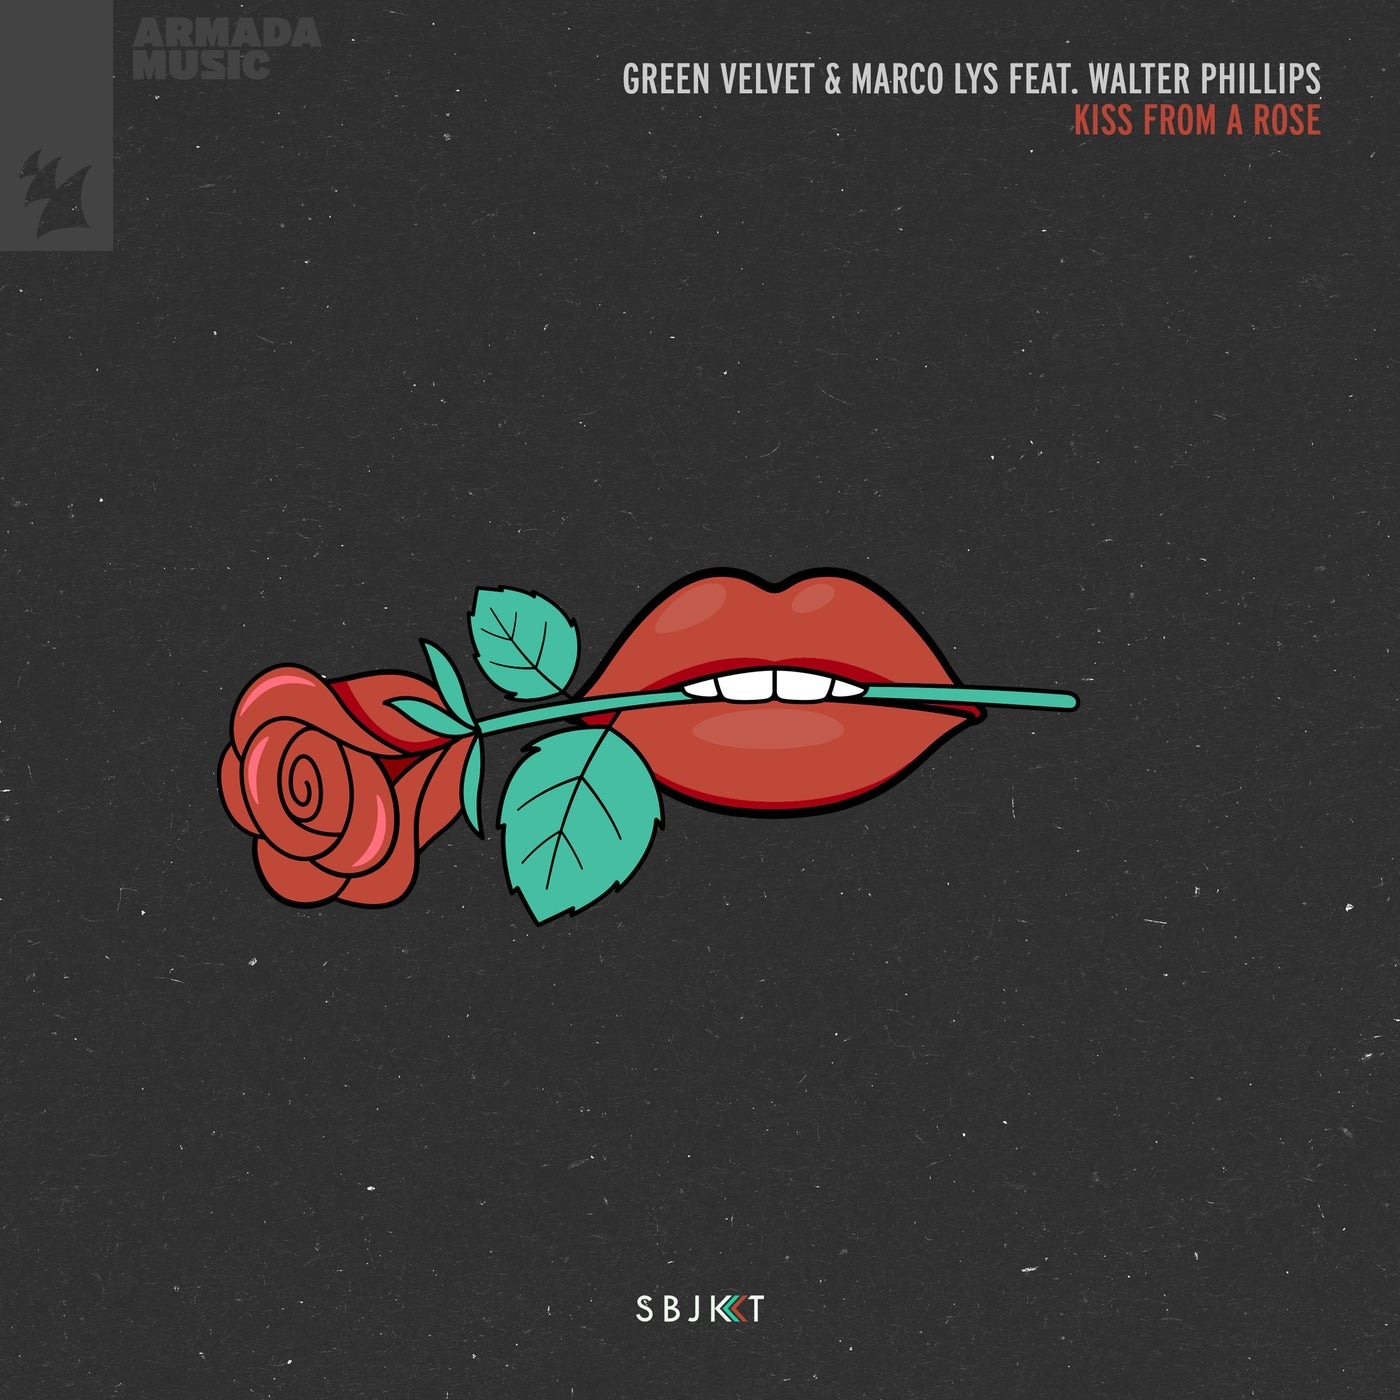 Green Velvet & Marco Lys feat. Walter Phillips - Kiss From A Rose on Armada Subjekt